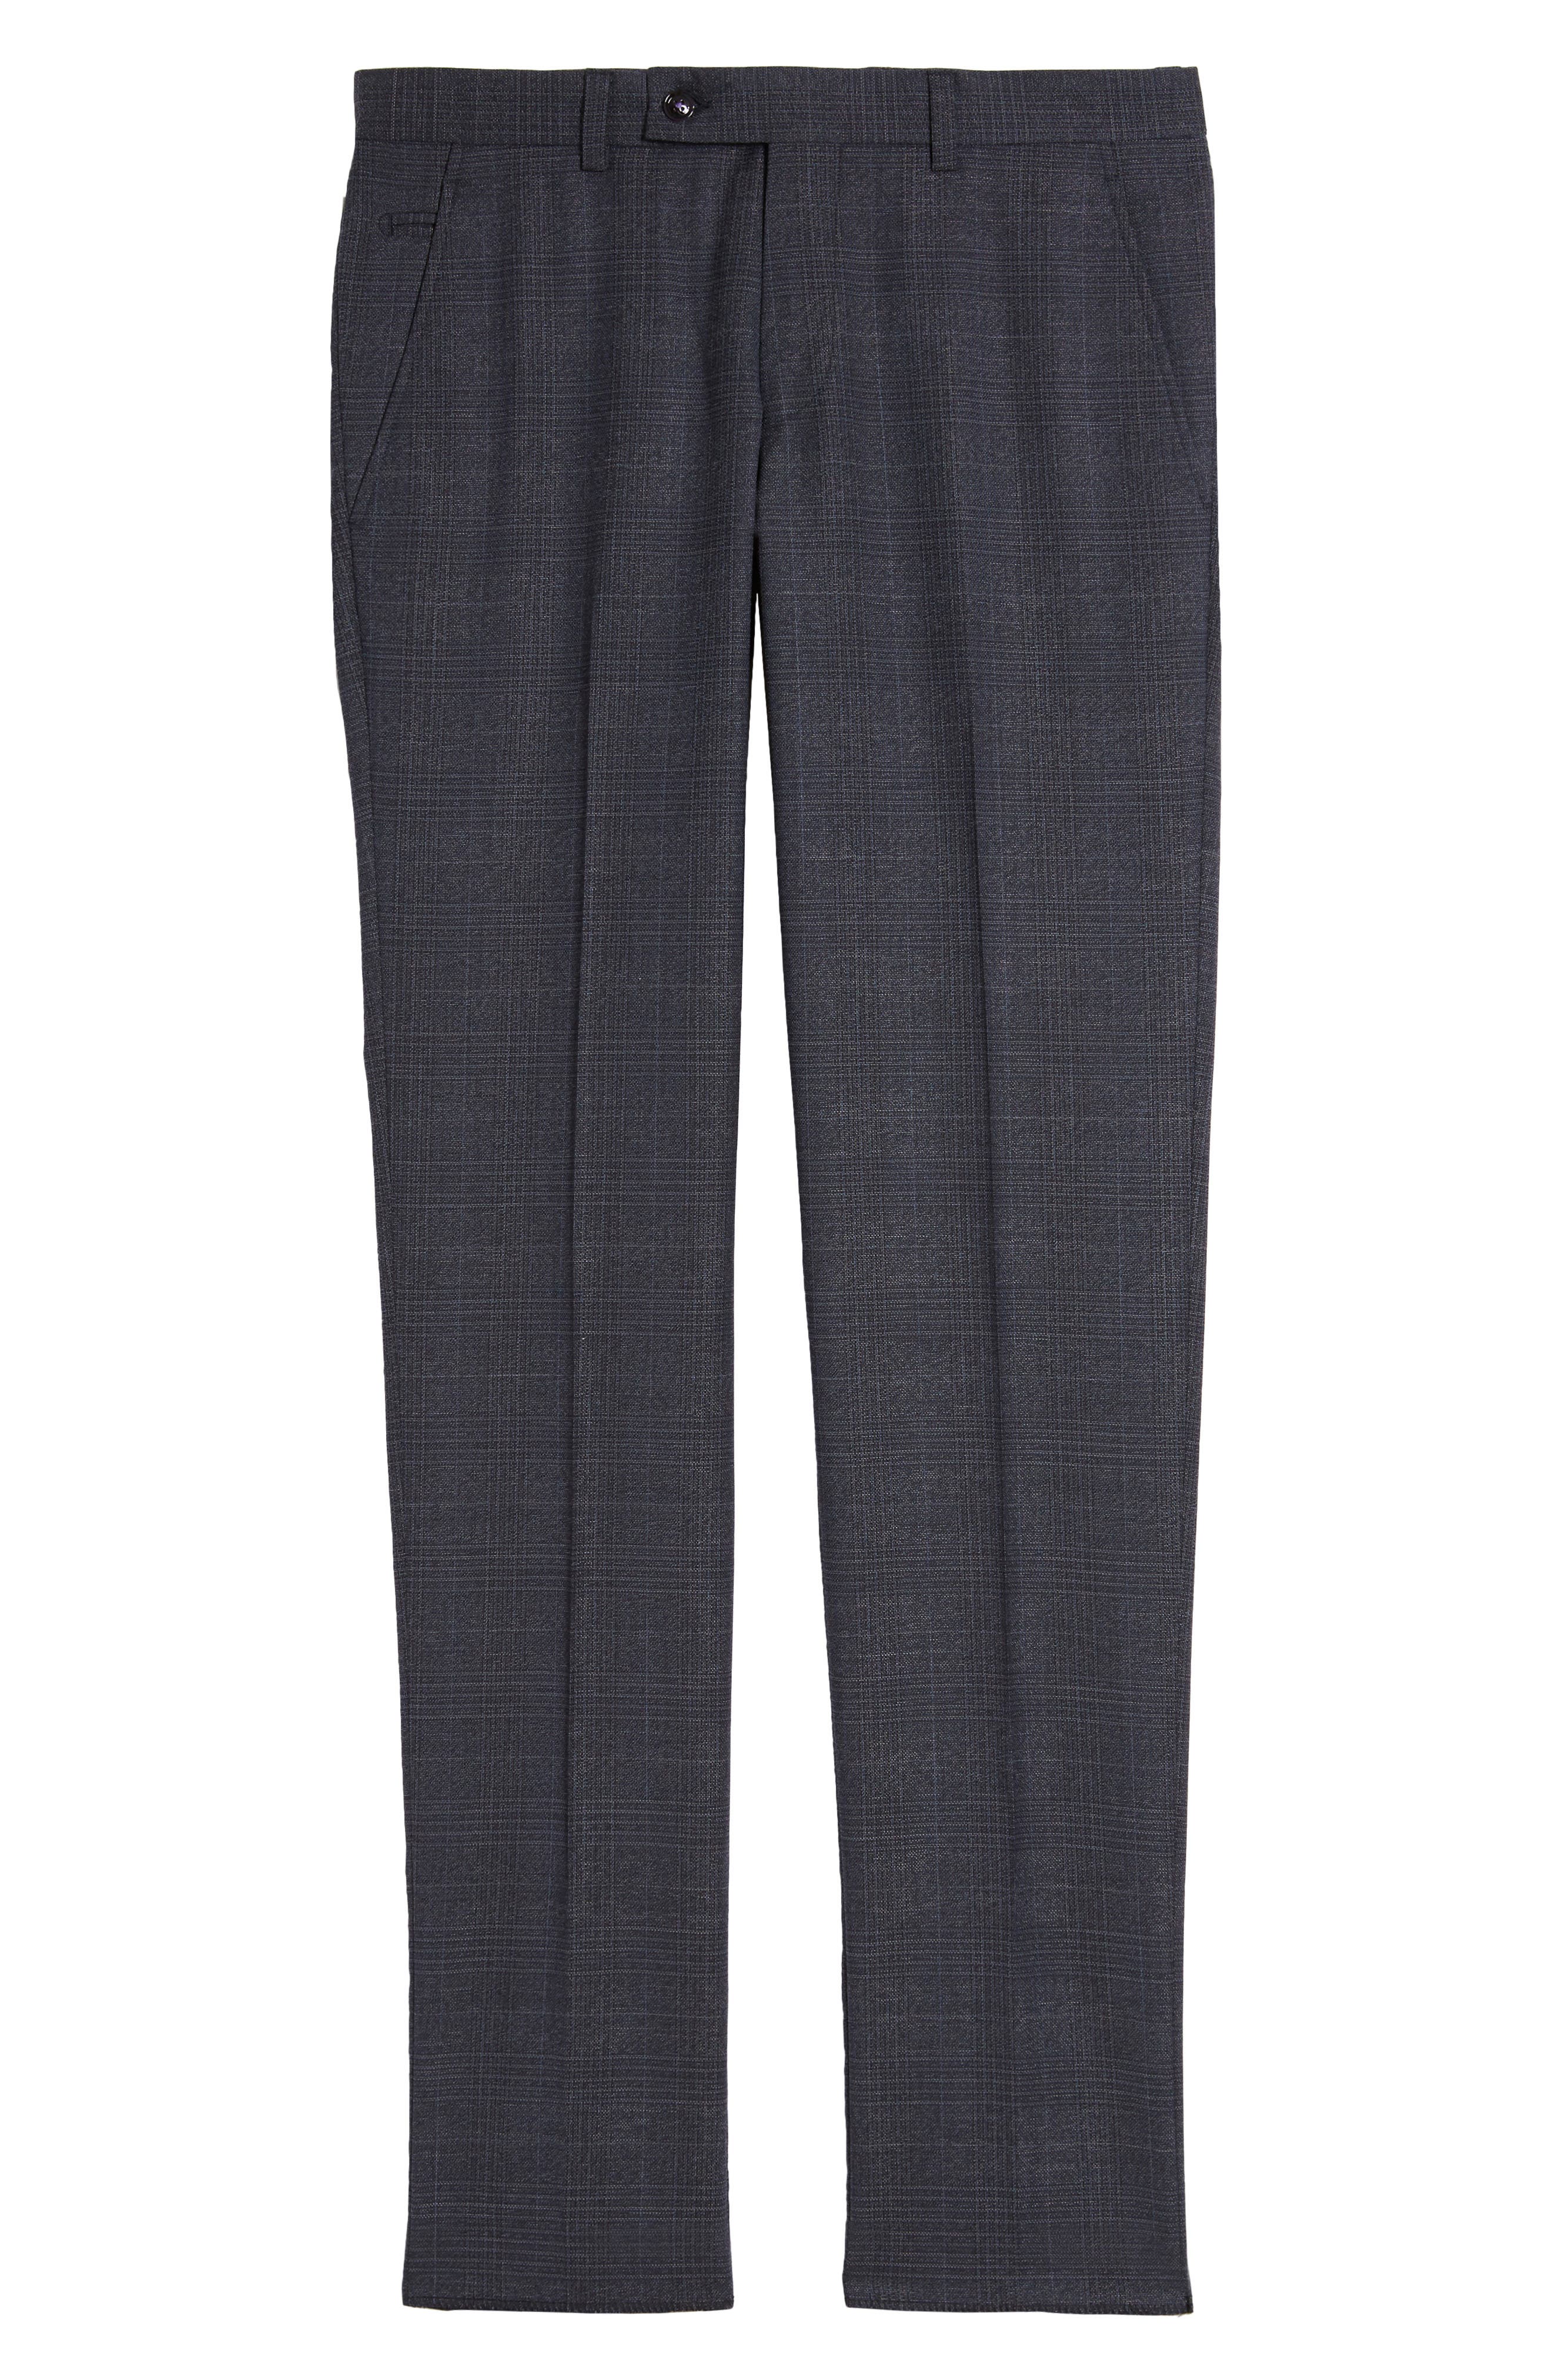 Ted Baker London | Jerome Flat Front Plaid Wool Dress Pants | Nordstrom ...